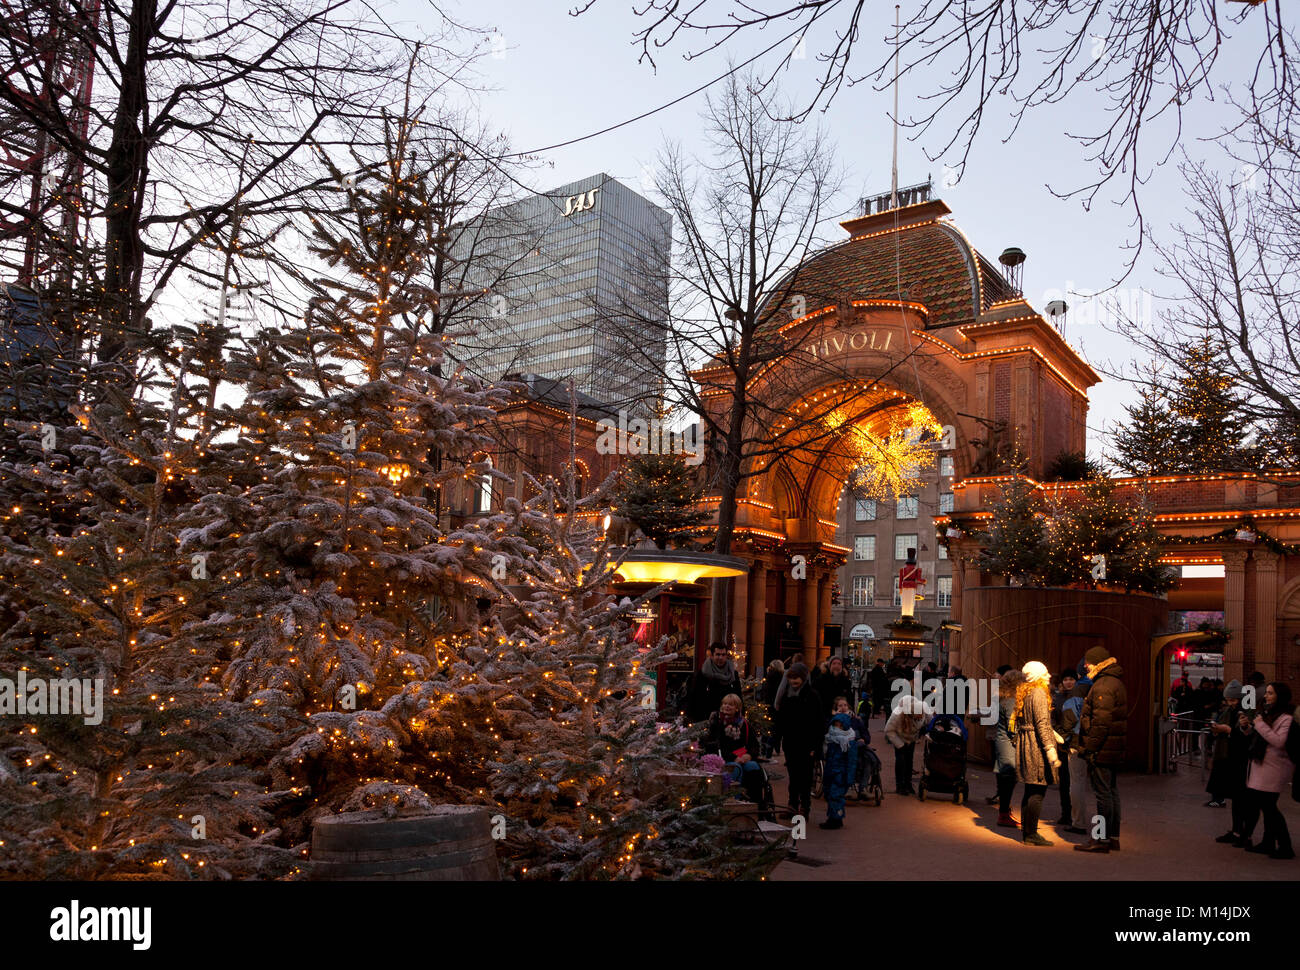 View out of main entrance of the Tivoli Gardens in Copenhagen at dusk during Christmas opening. The Radisson Blu Royal Hotel towering in background. Stock Photo